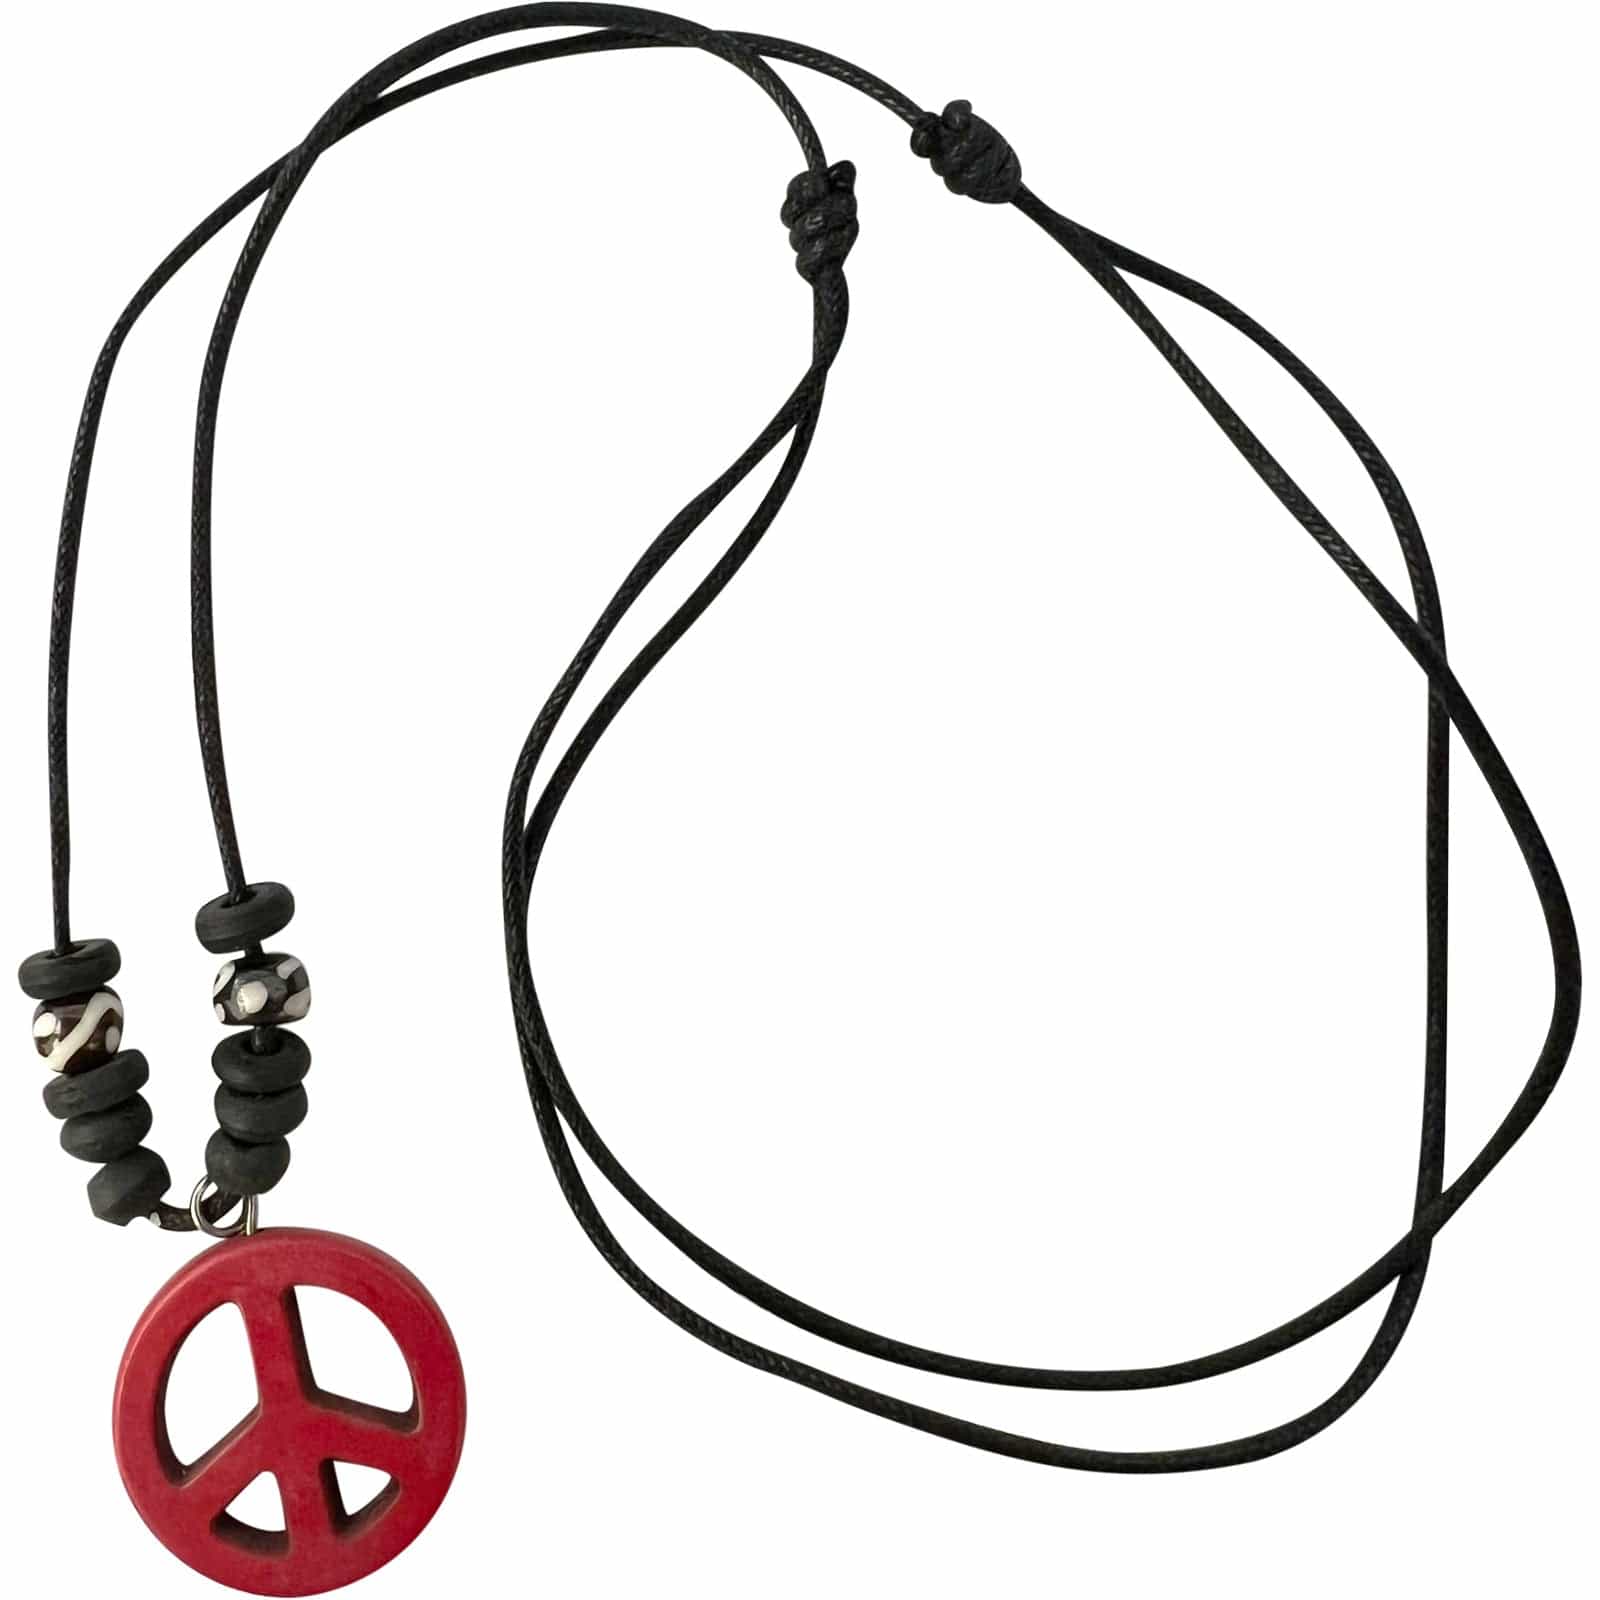 Red Peace Sign Symbol Pendant Necklace Black Cord Chain Mens Womens Jewellery